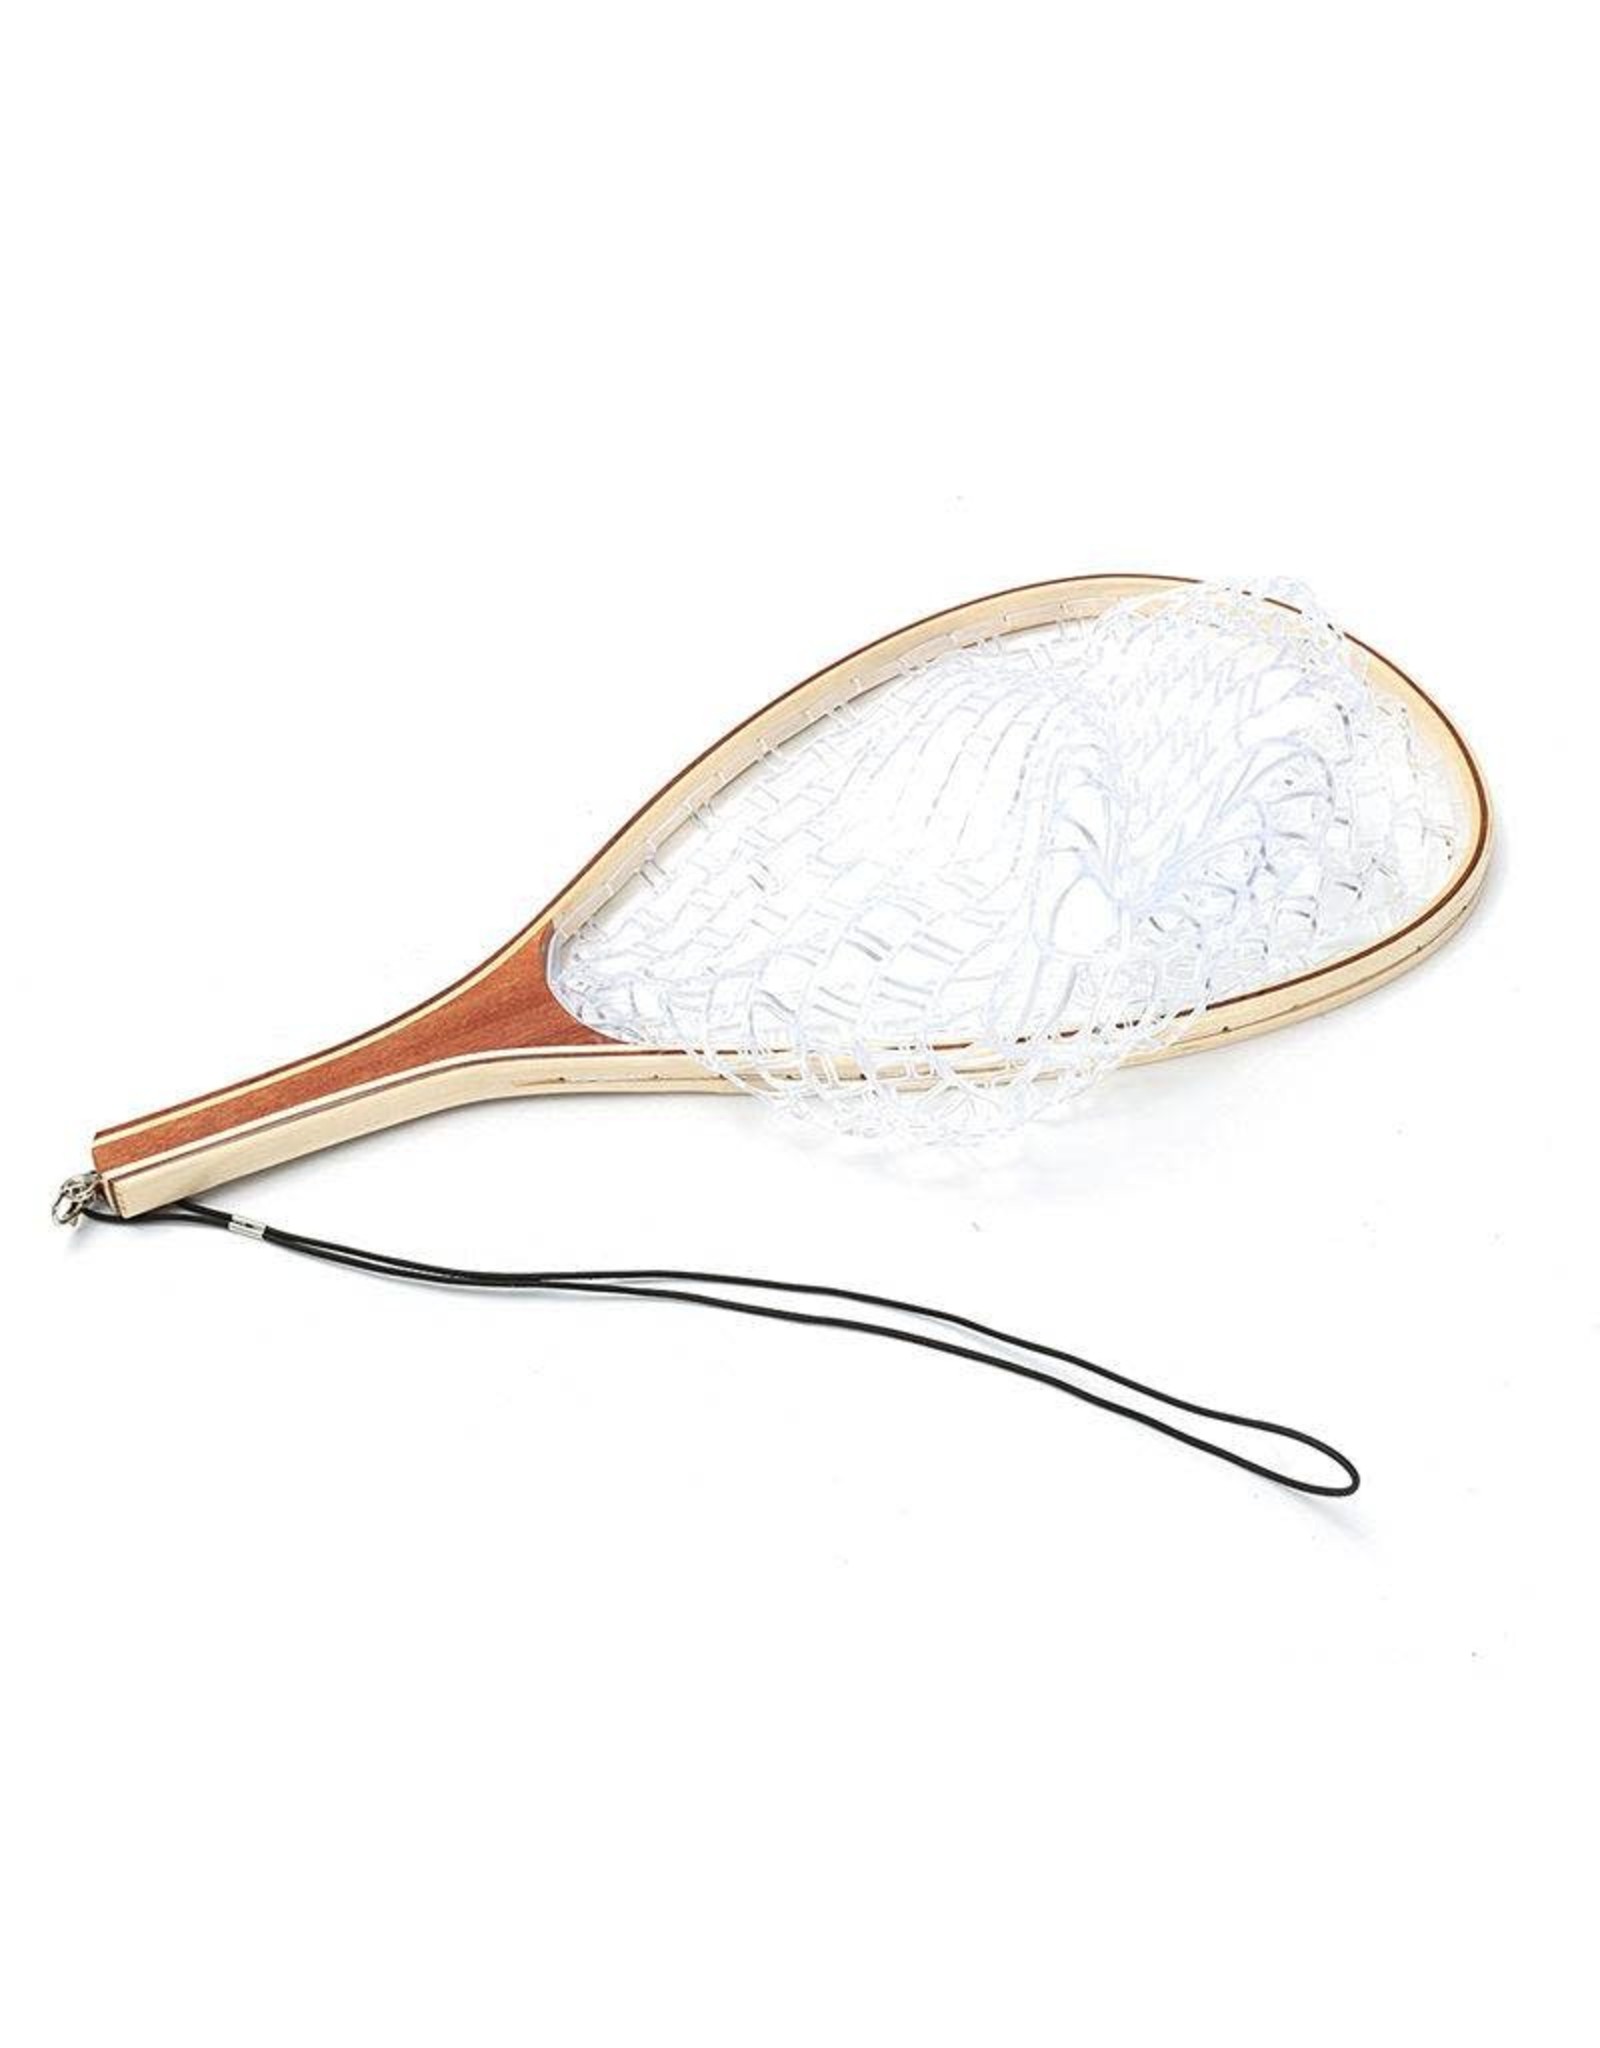 Anglers Accessories Anglers' Accessories Wooden Invisible Bag Net